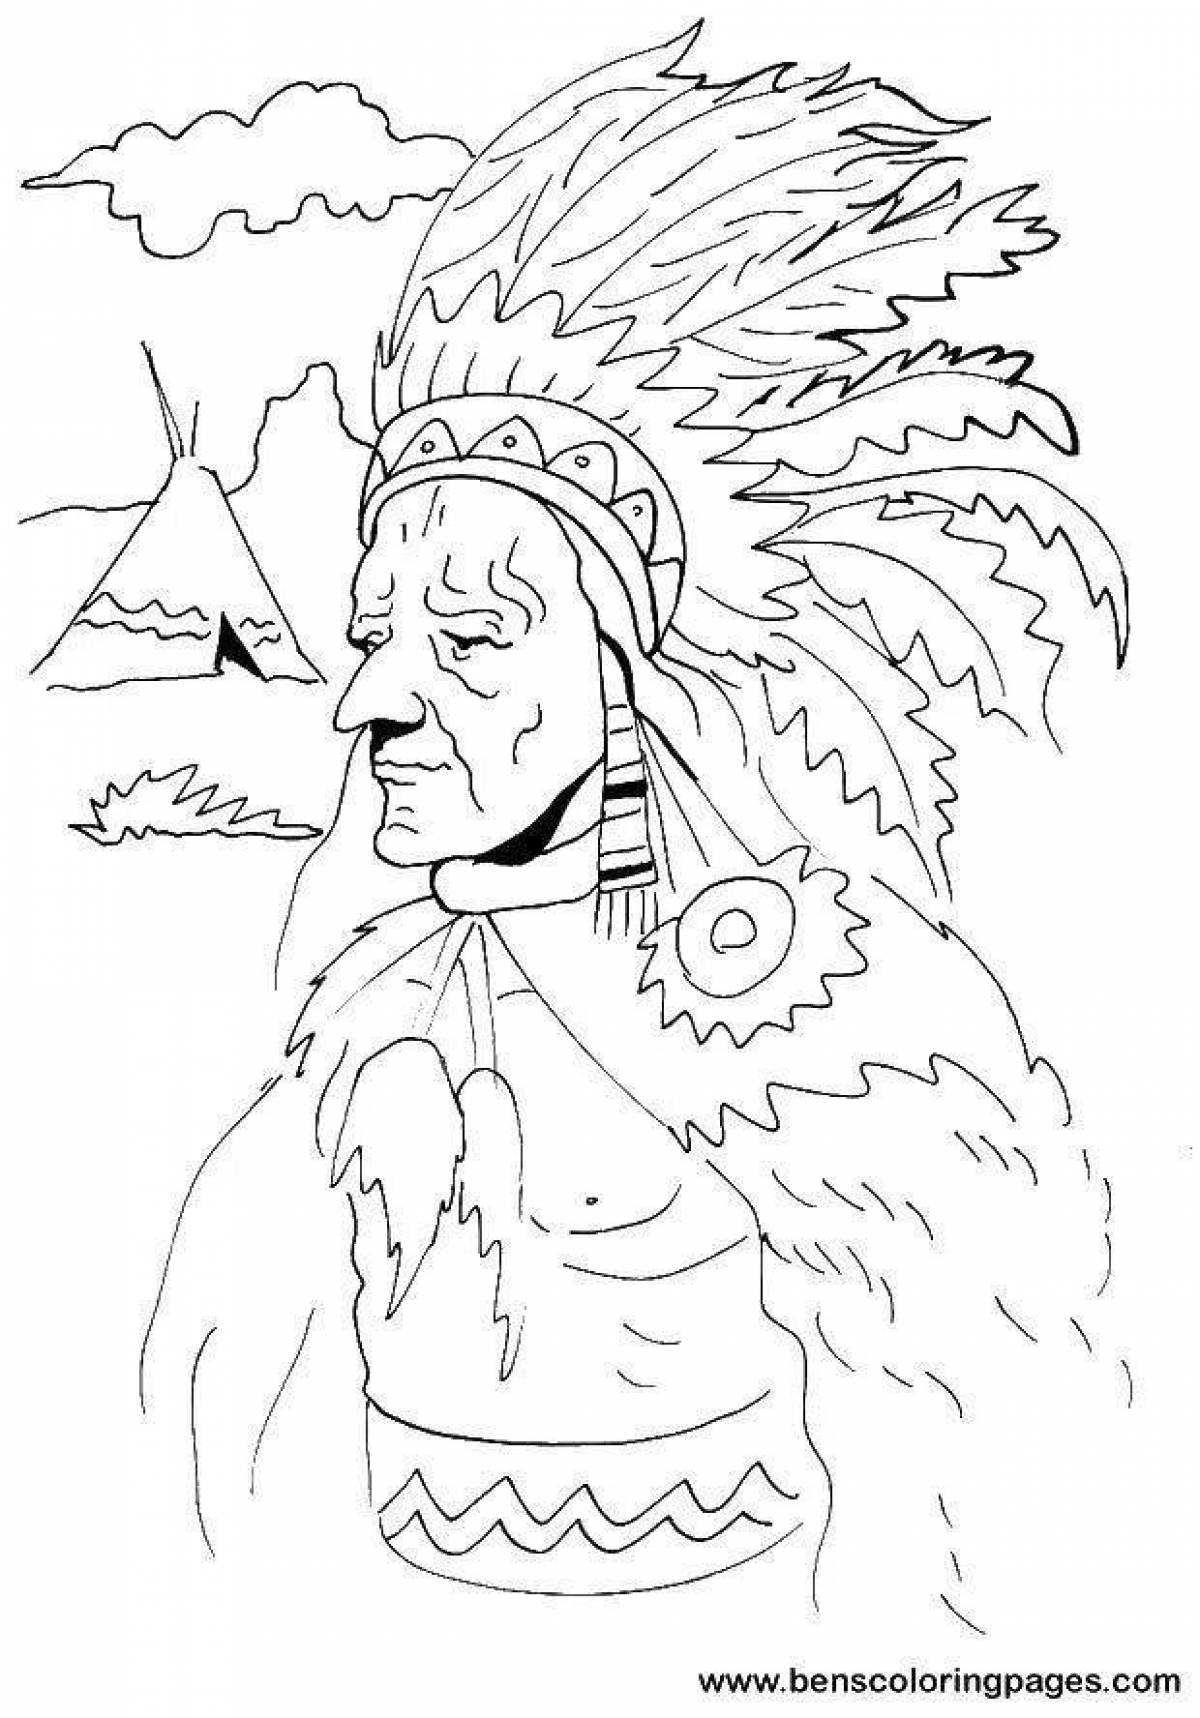 Amazing Indian Coloring Pages